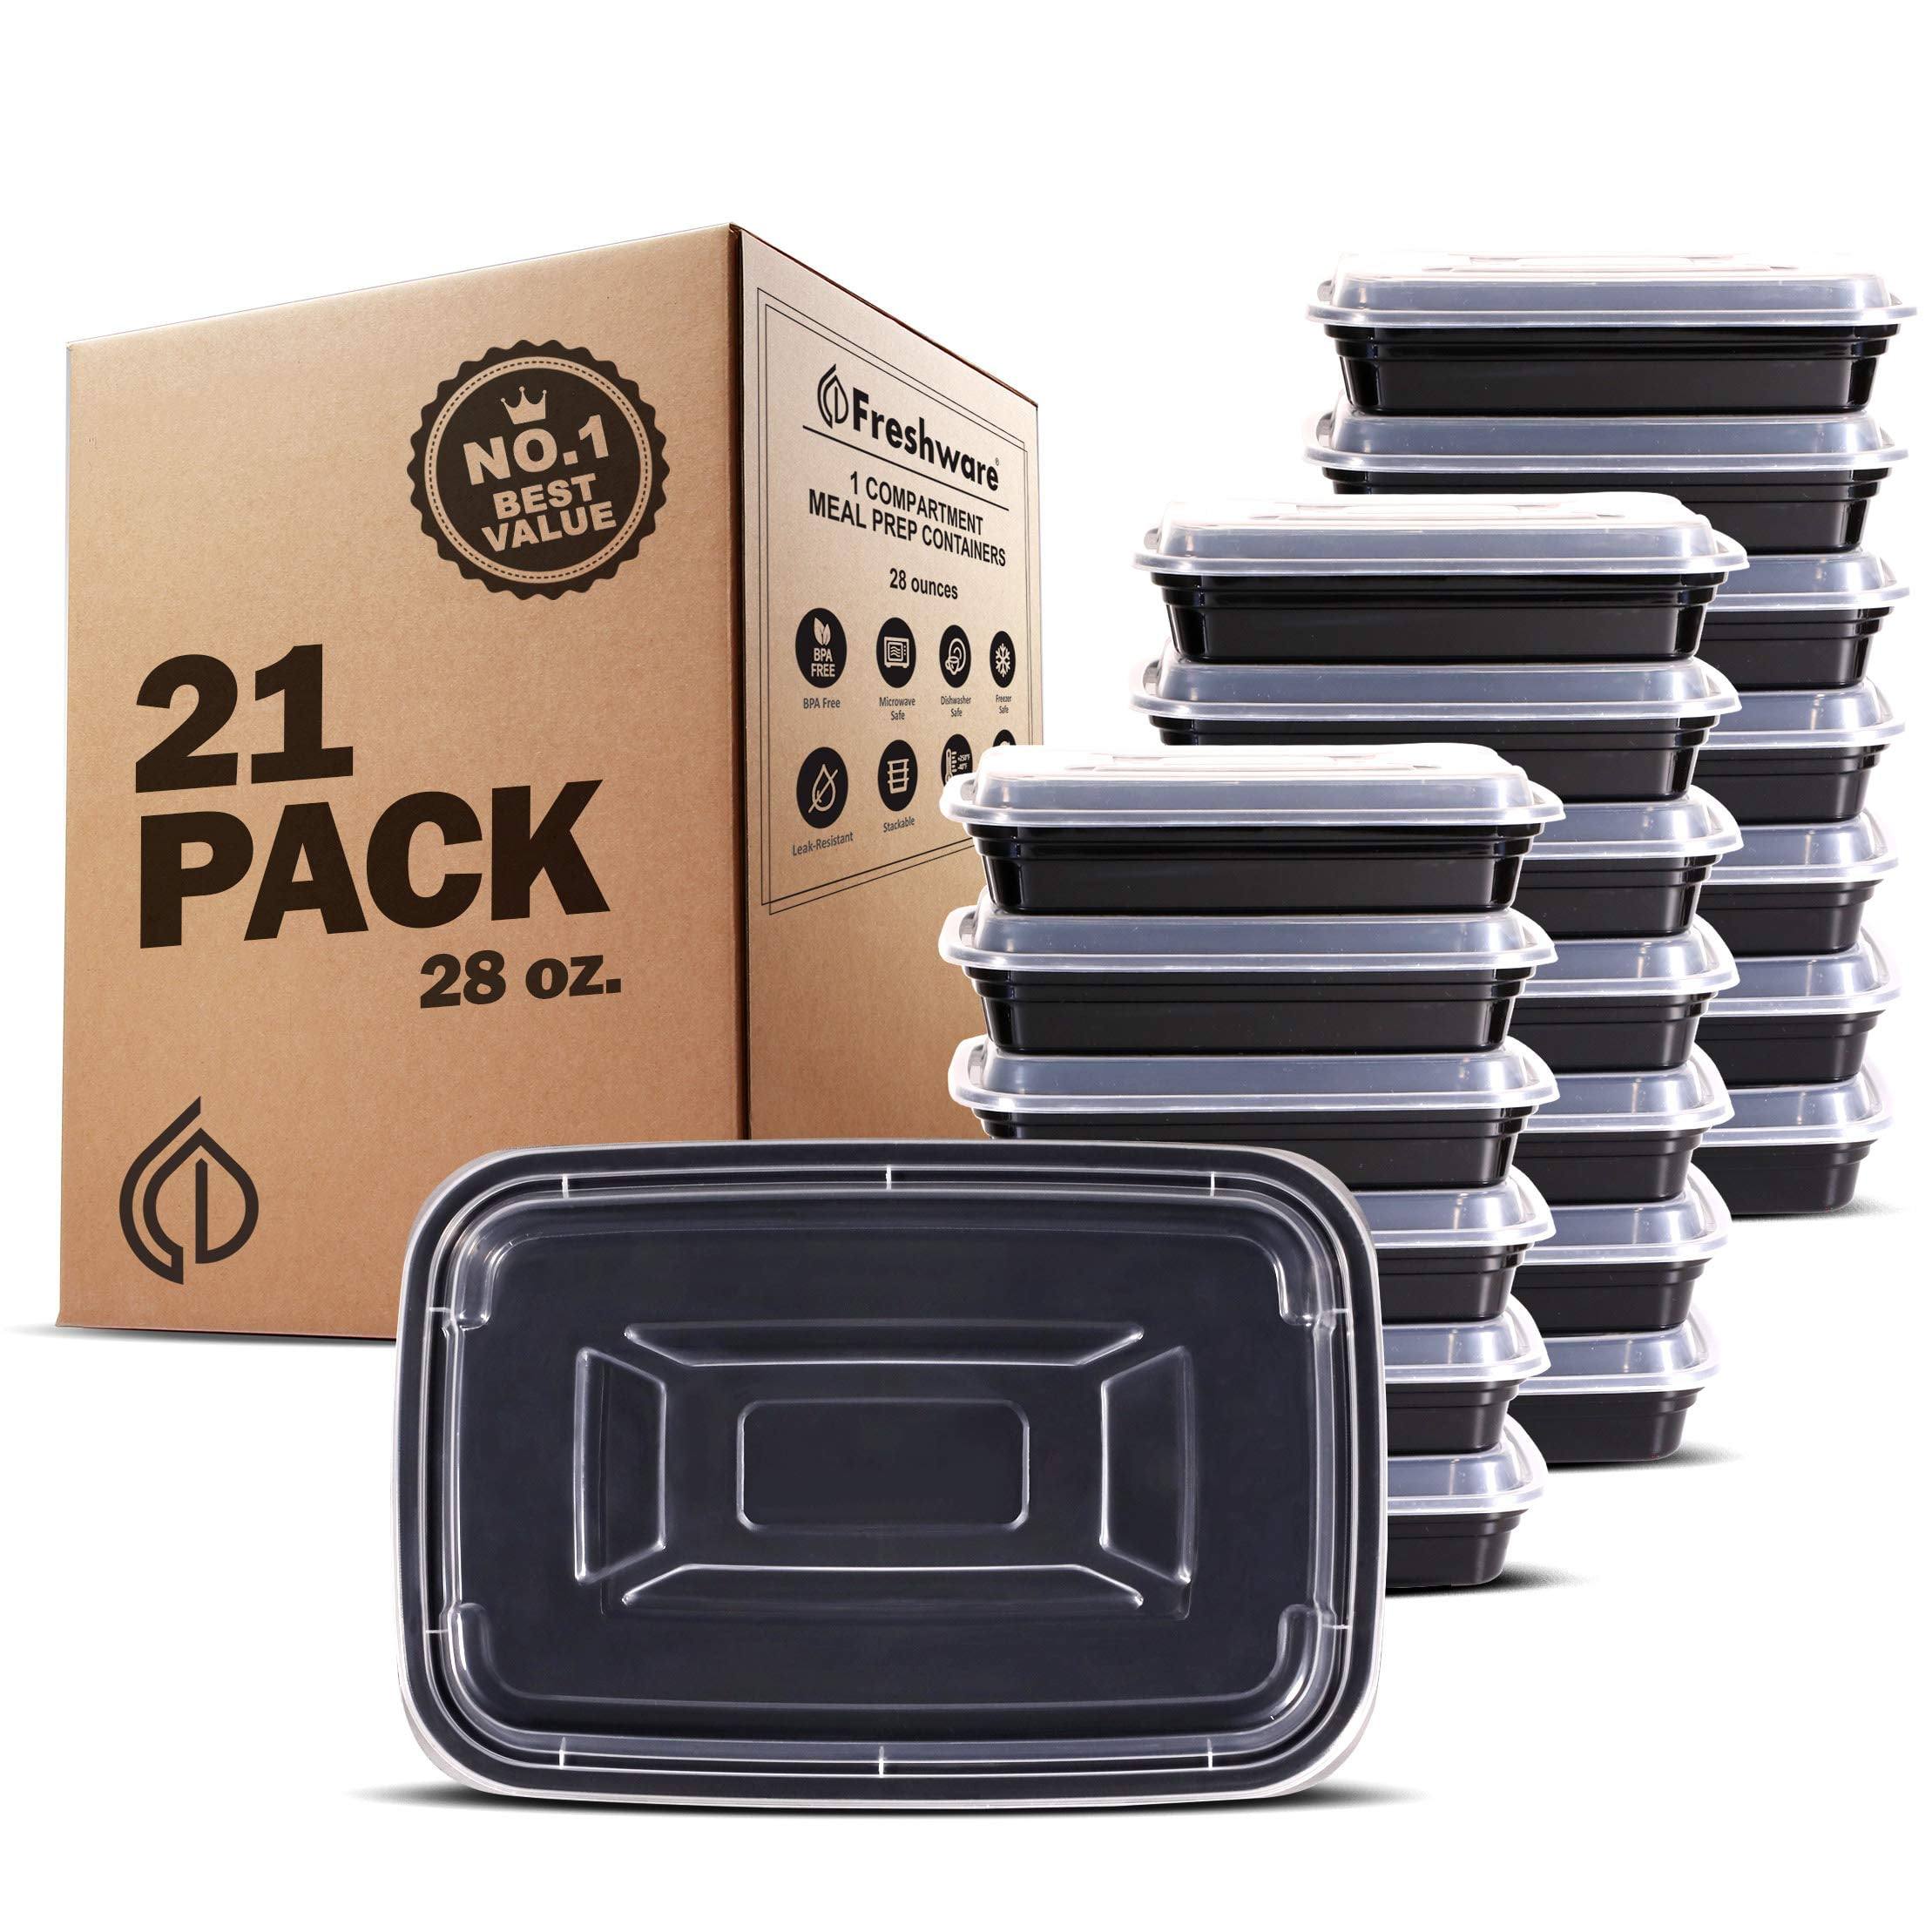 Freshware Meal Prep Containers, Bento Box, Plastic Containers